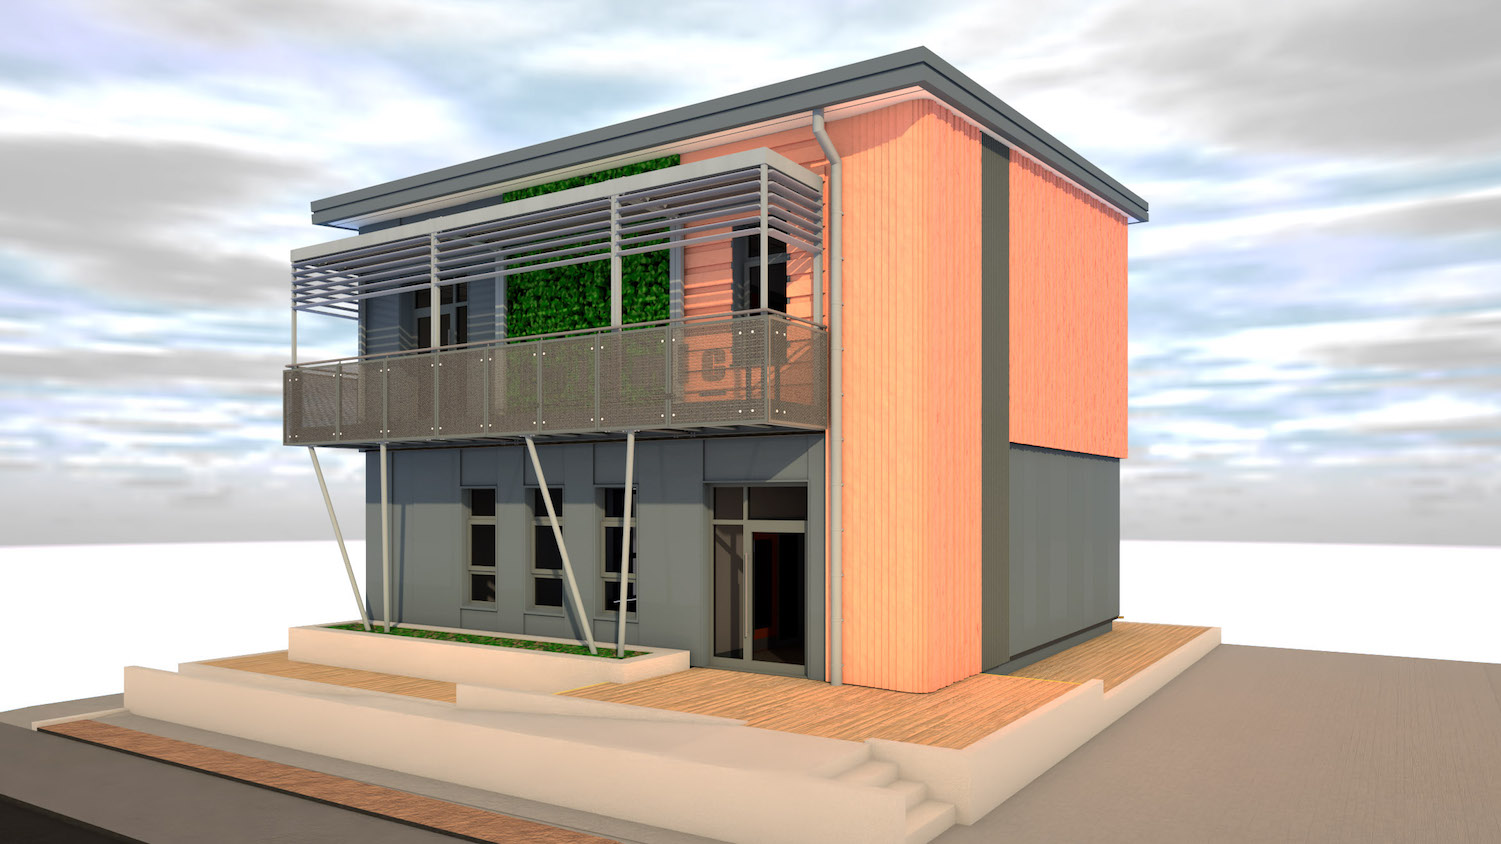 A render of the Seismic school building